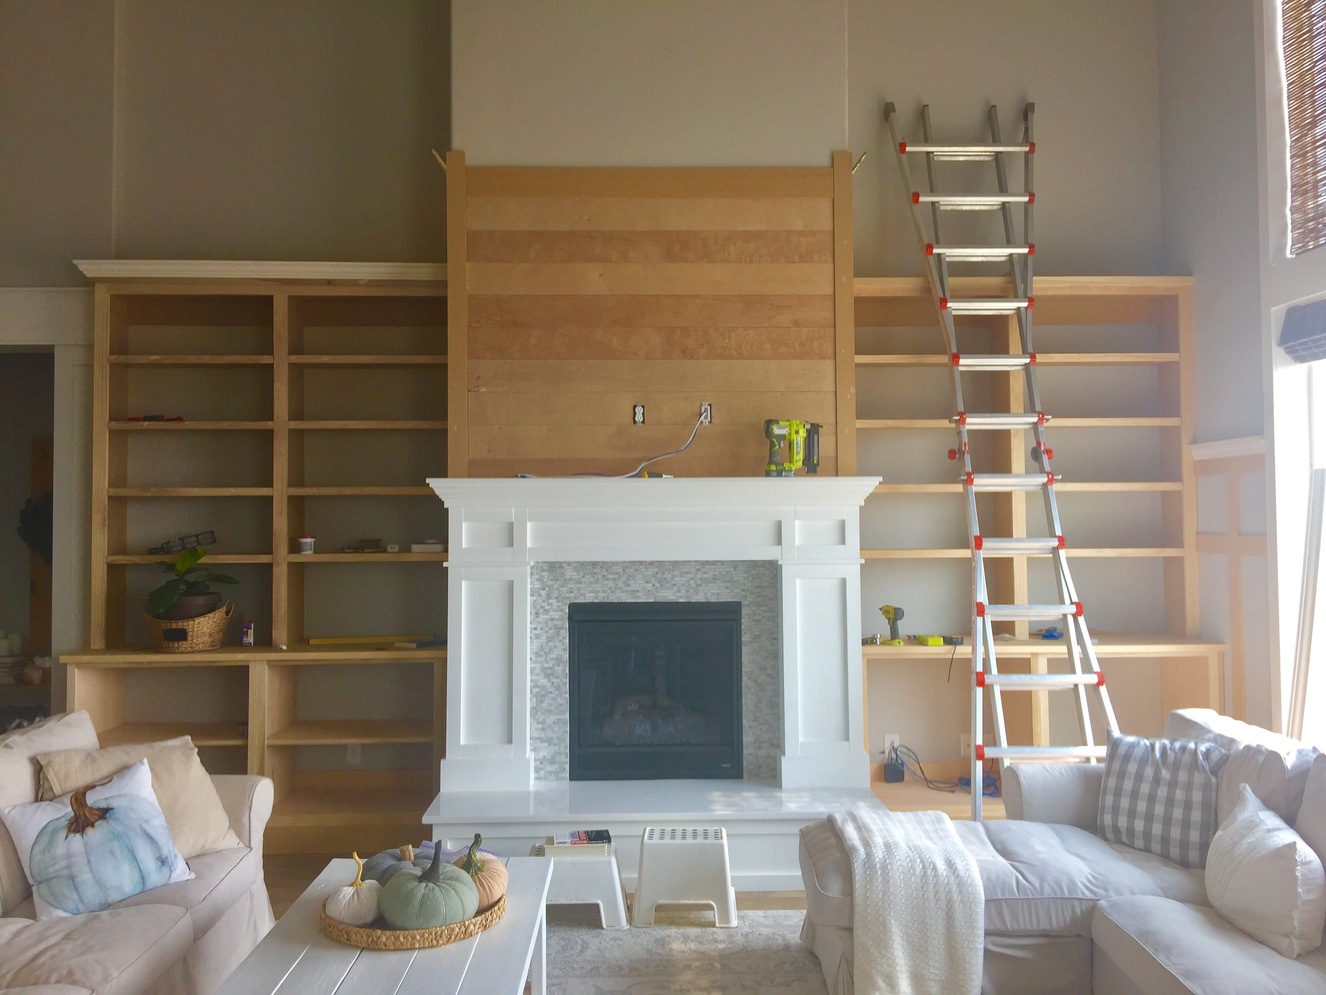 How To Build Built In Shelves Around Fireplace